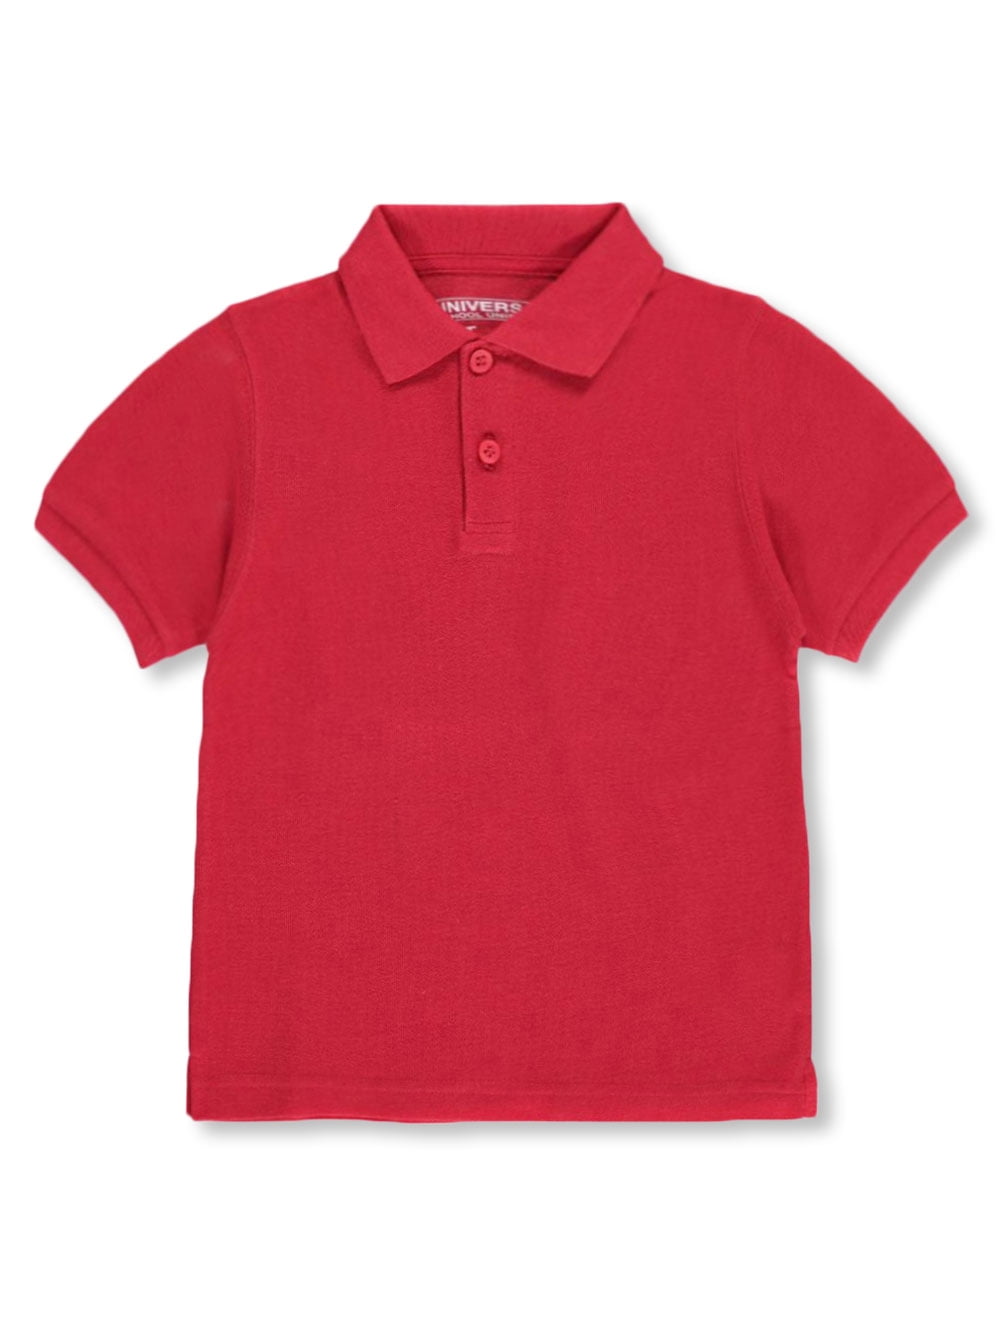 Toddler Red Pique Polo Short Sleeve French Toast School Uniform Sizes 2T to 4T 